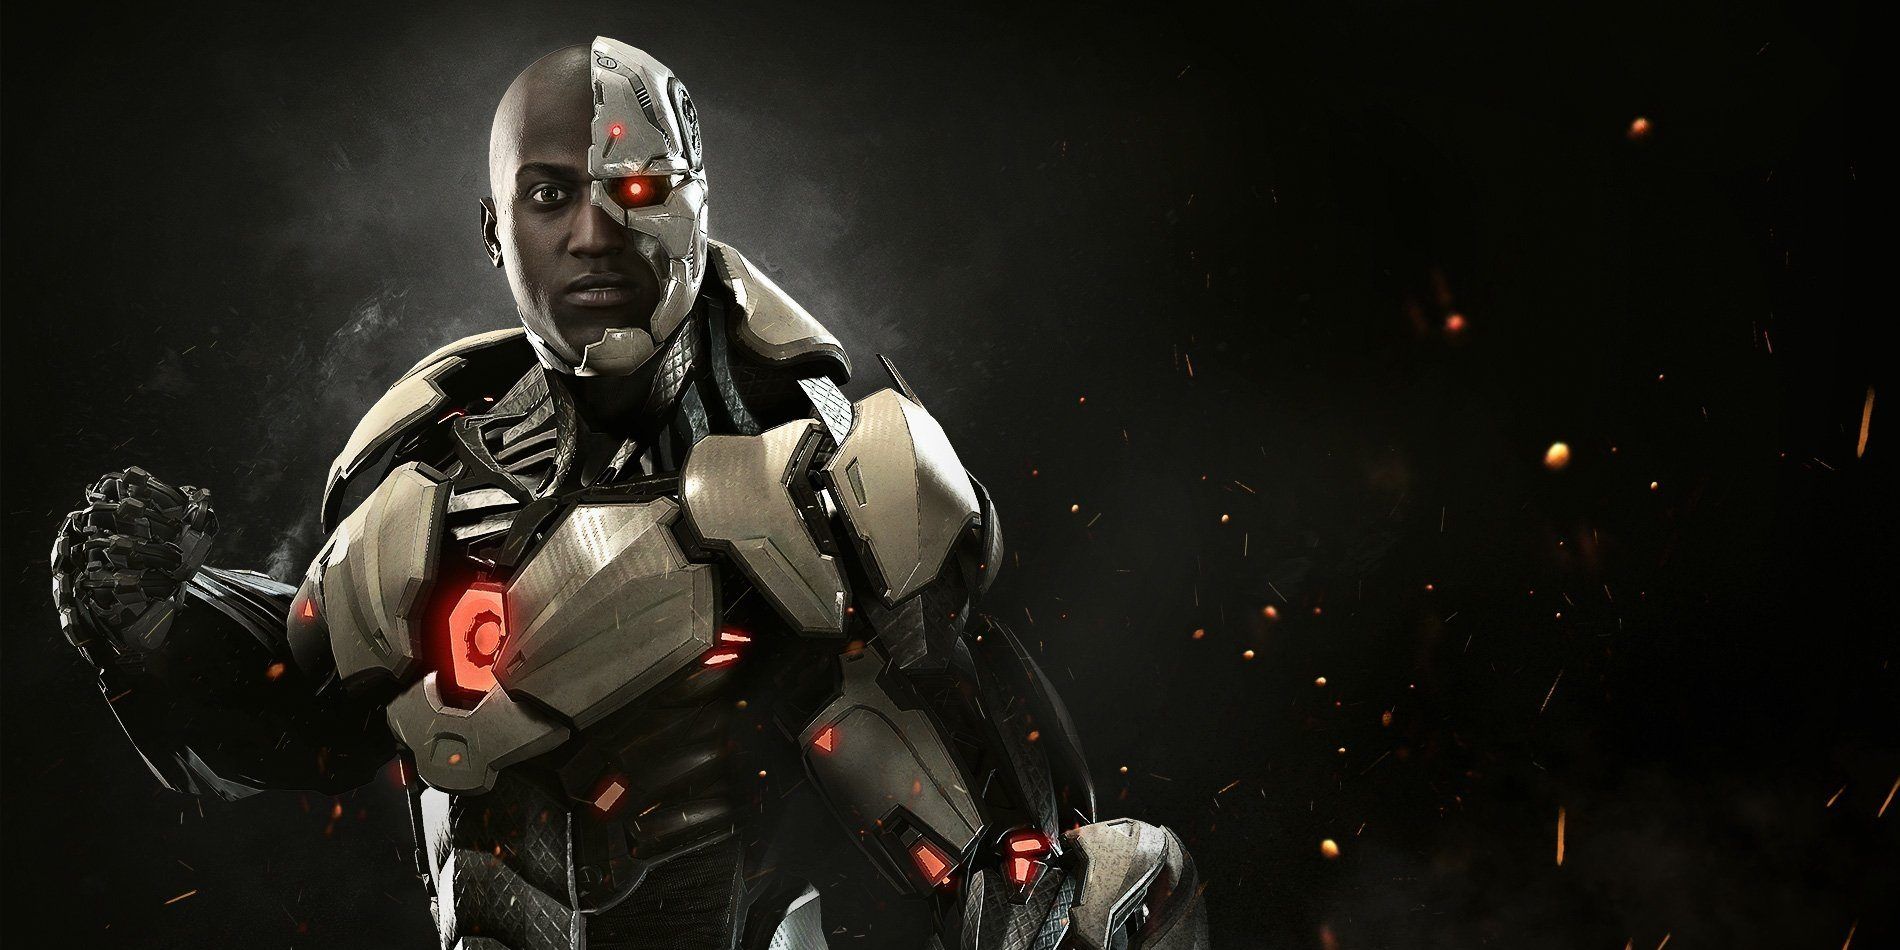 Cyborg from Injustice 2 in a loading screen